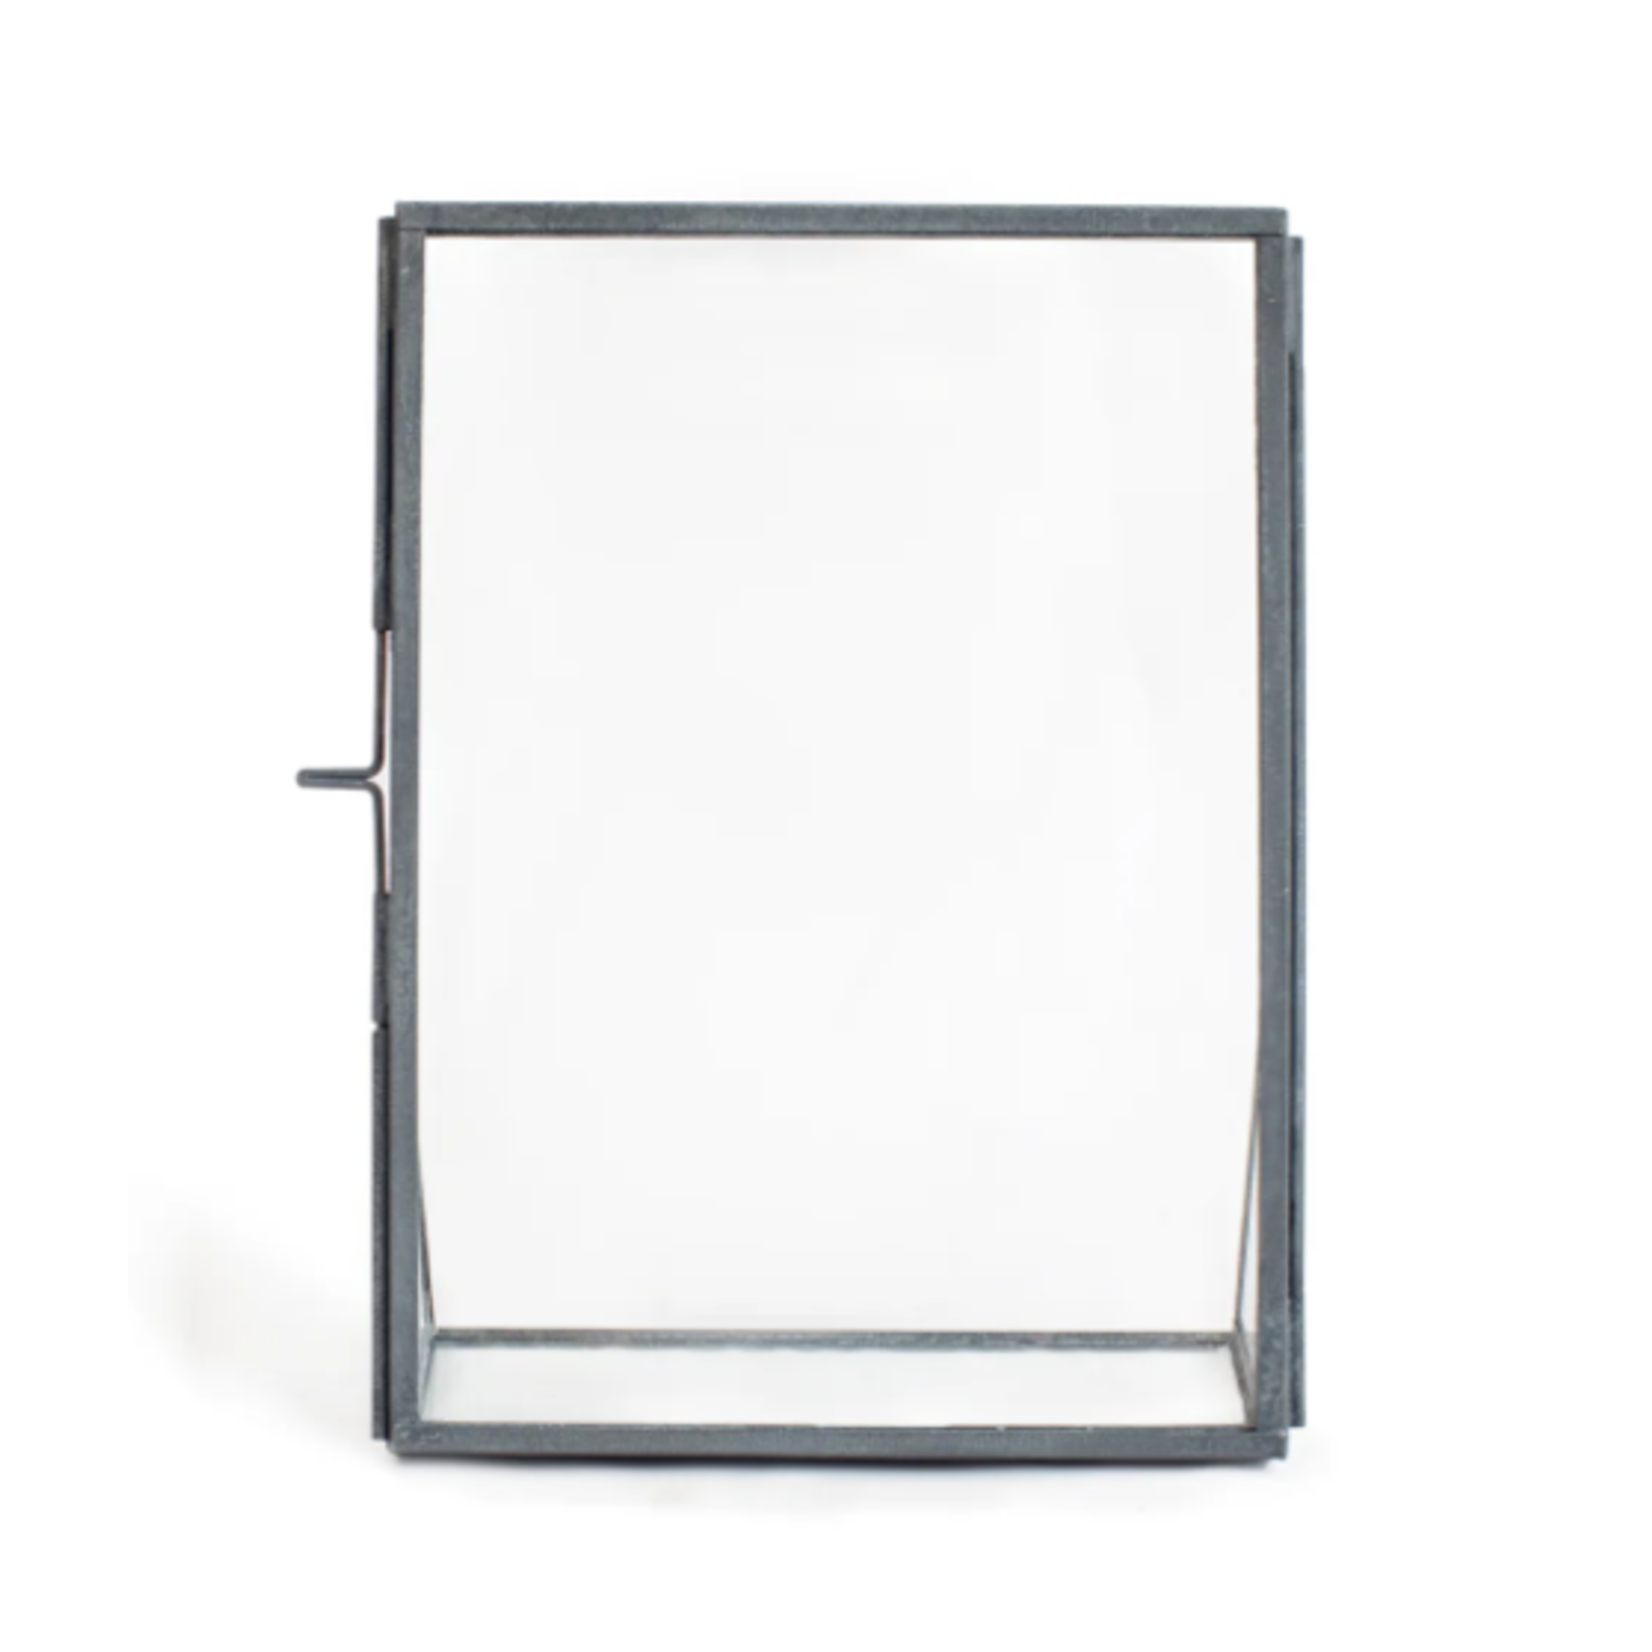 Sugarboo & Co. Sugarboo AC337 4x6 vertical zinc finish standing picture frame